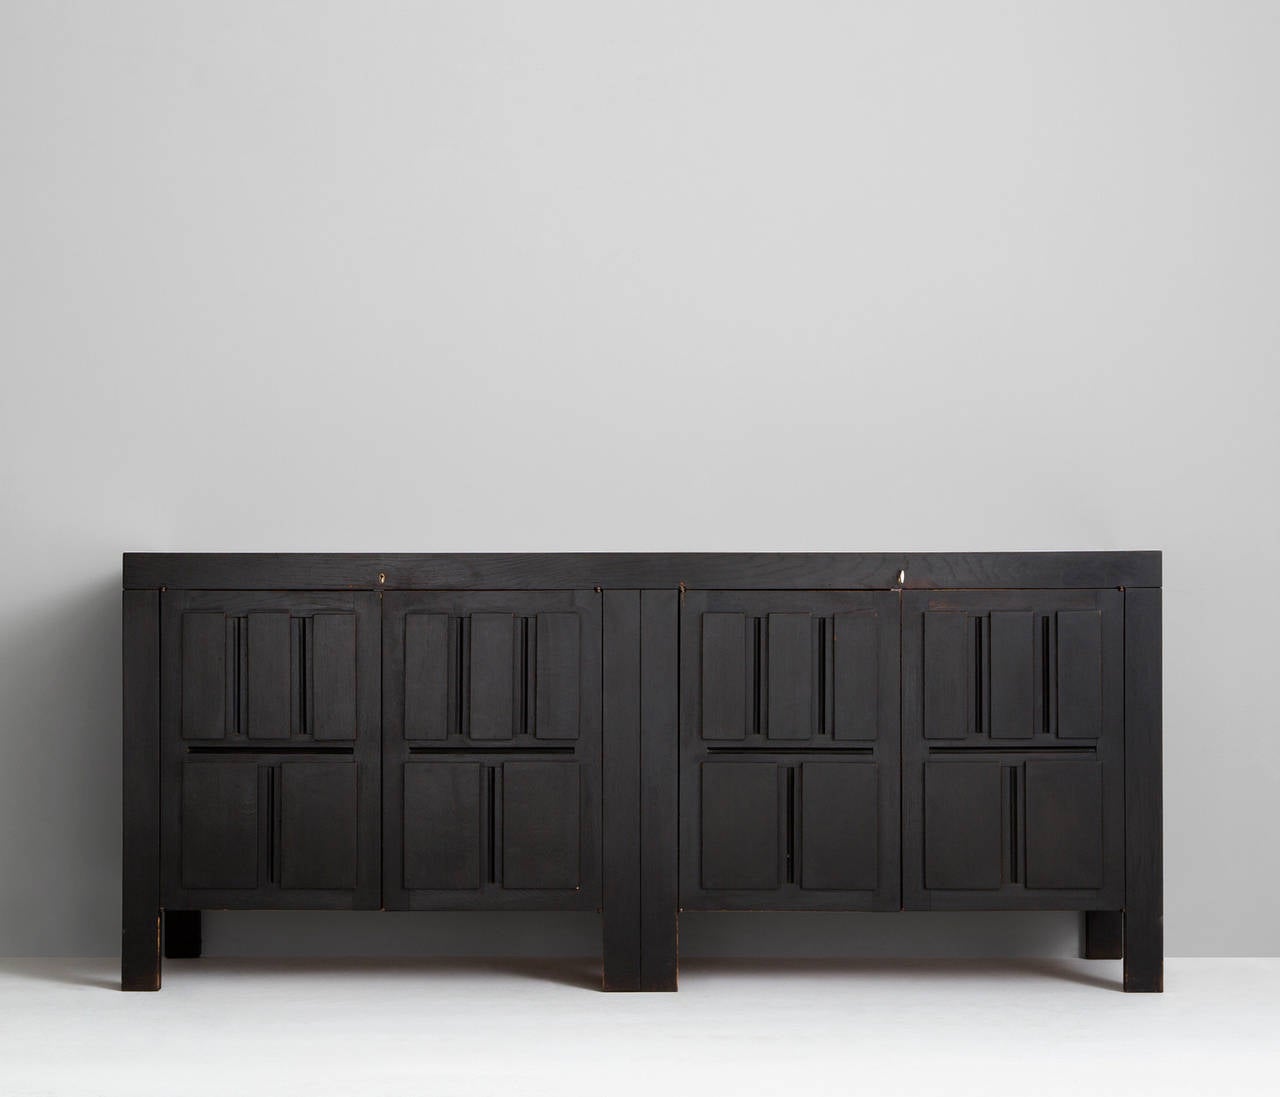 Sideboard, in wood, by De Coene, Belgium, 1970s.

Very well designed graphic credenza with dark brown stained finish designed by de Coene, Belgium. The matte dark brown finish is a perfect combination with the graphing panels because of the high